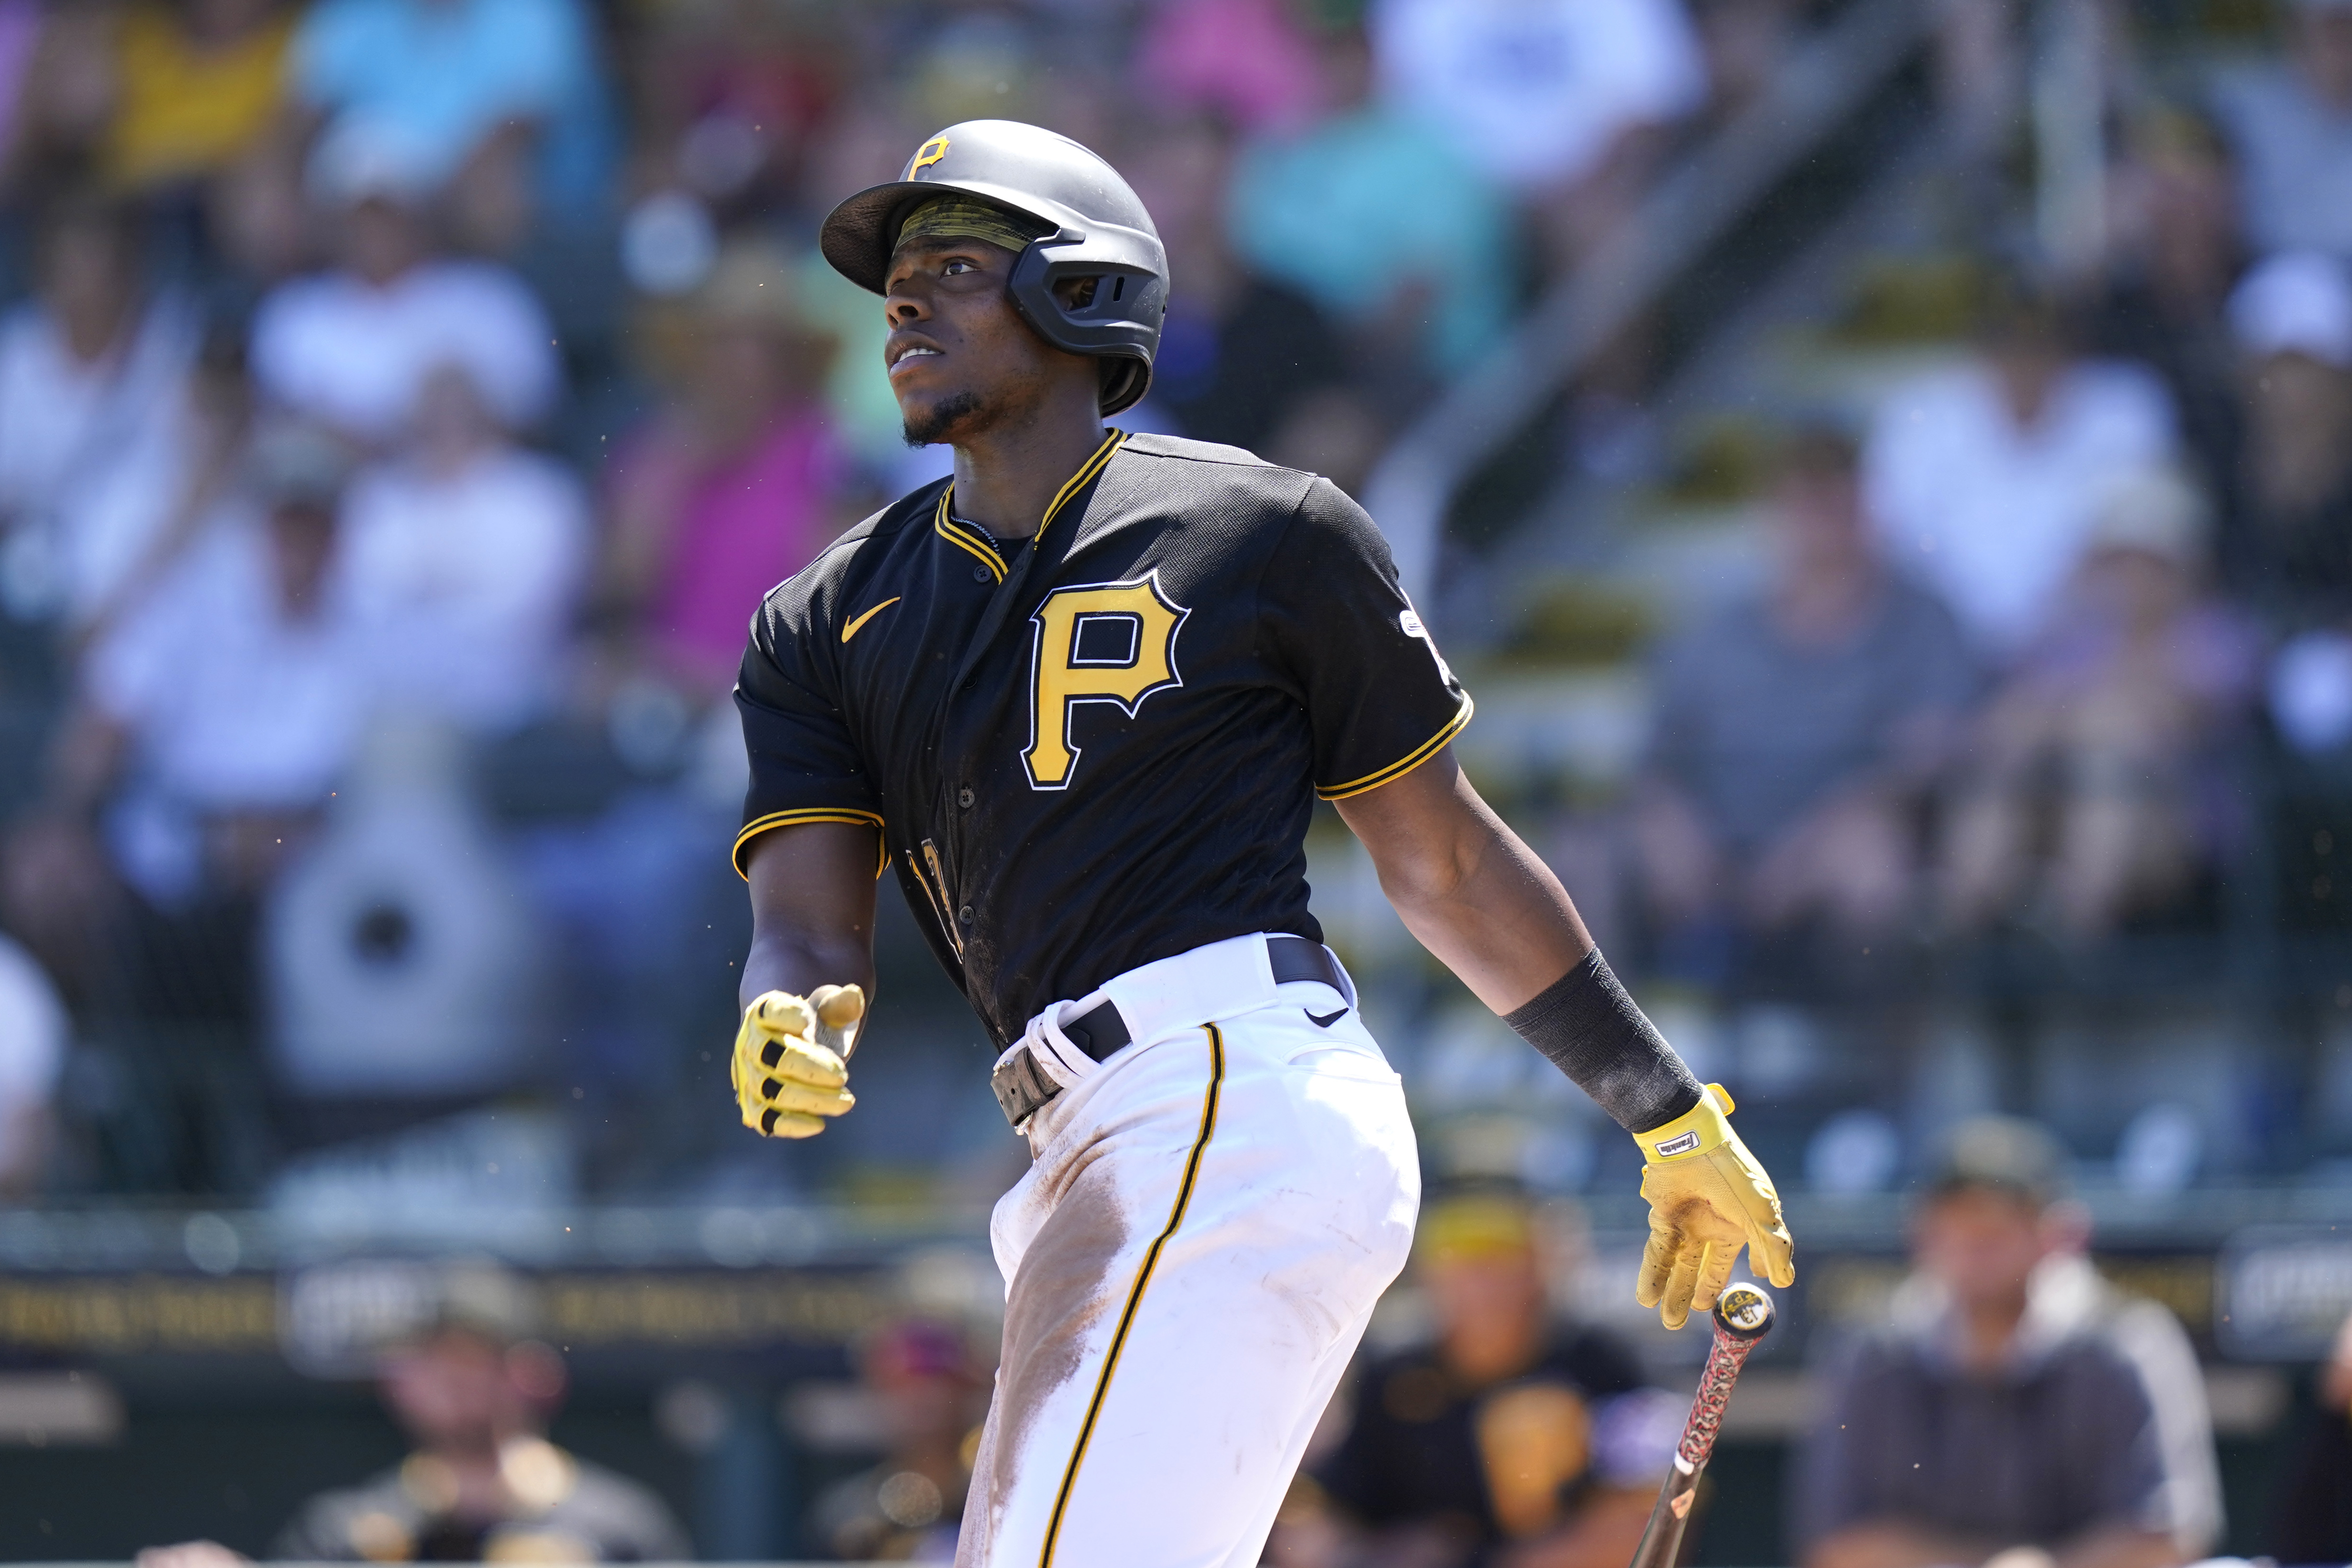 Is Ke'Bryan Hayes Time Almost Upon Us? – Pittsburgh Baseball Network –  Pirates